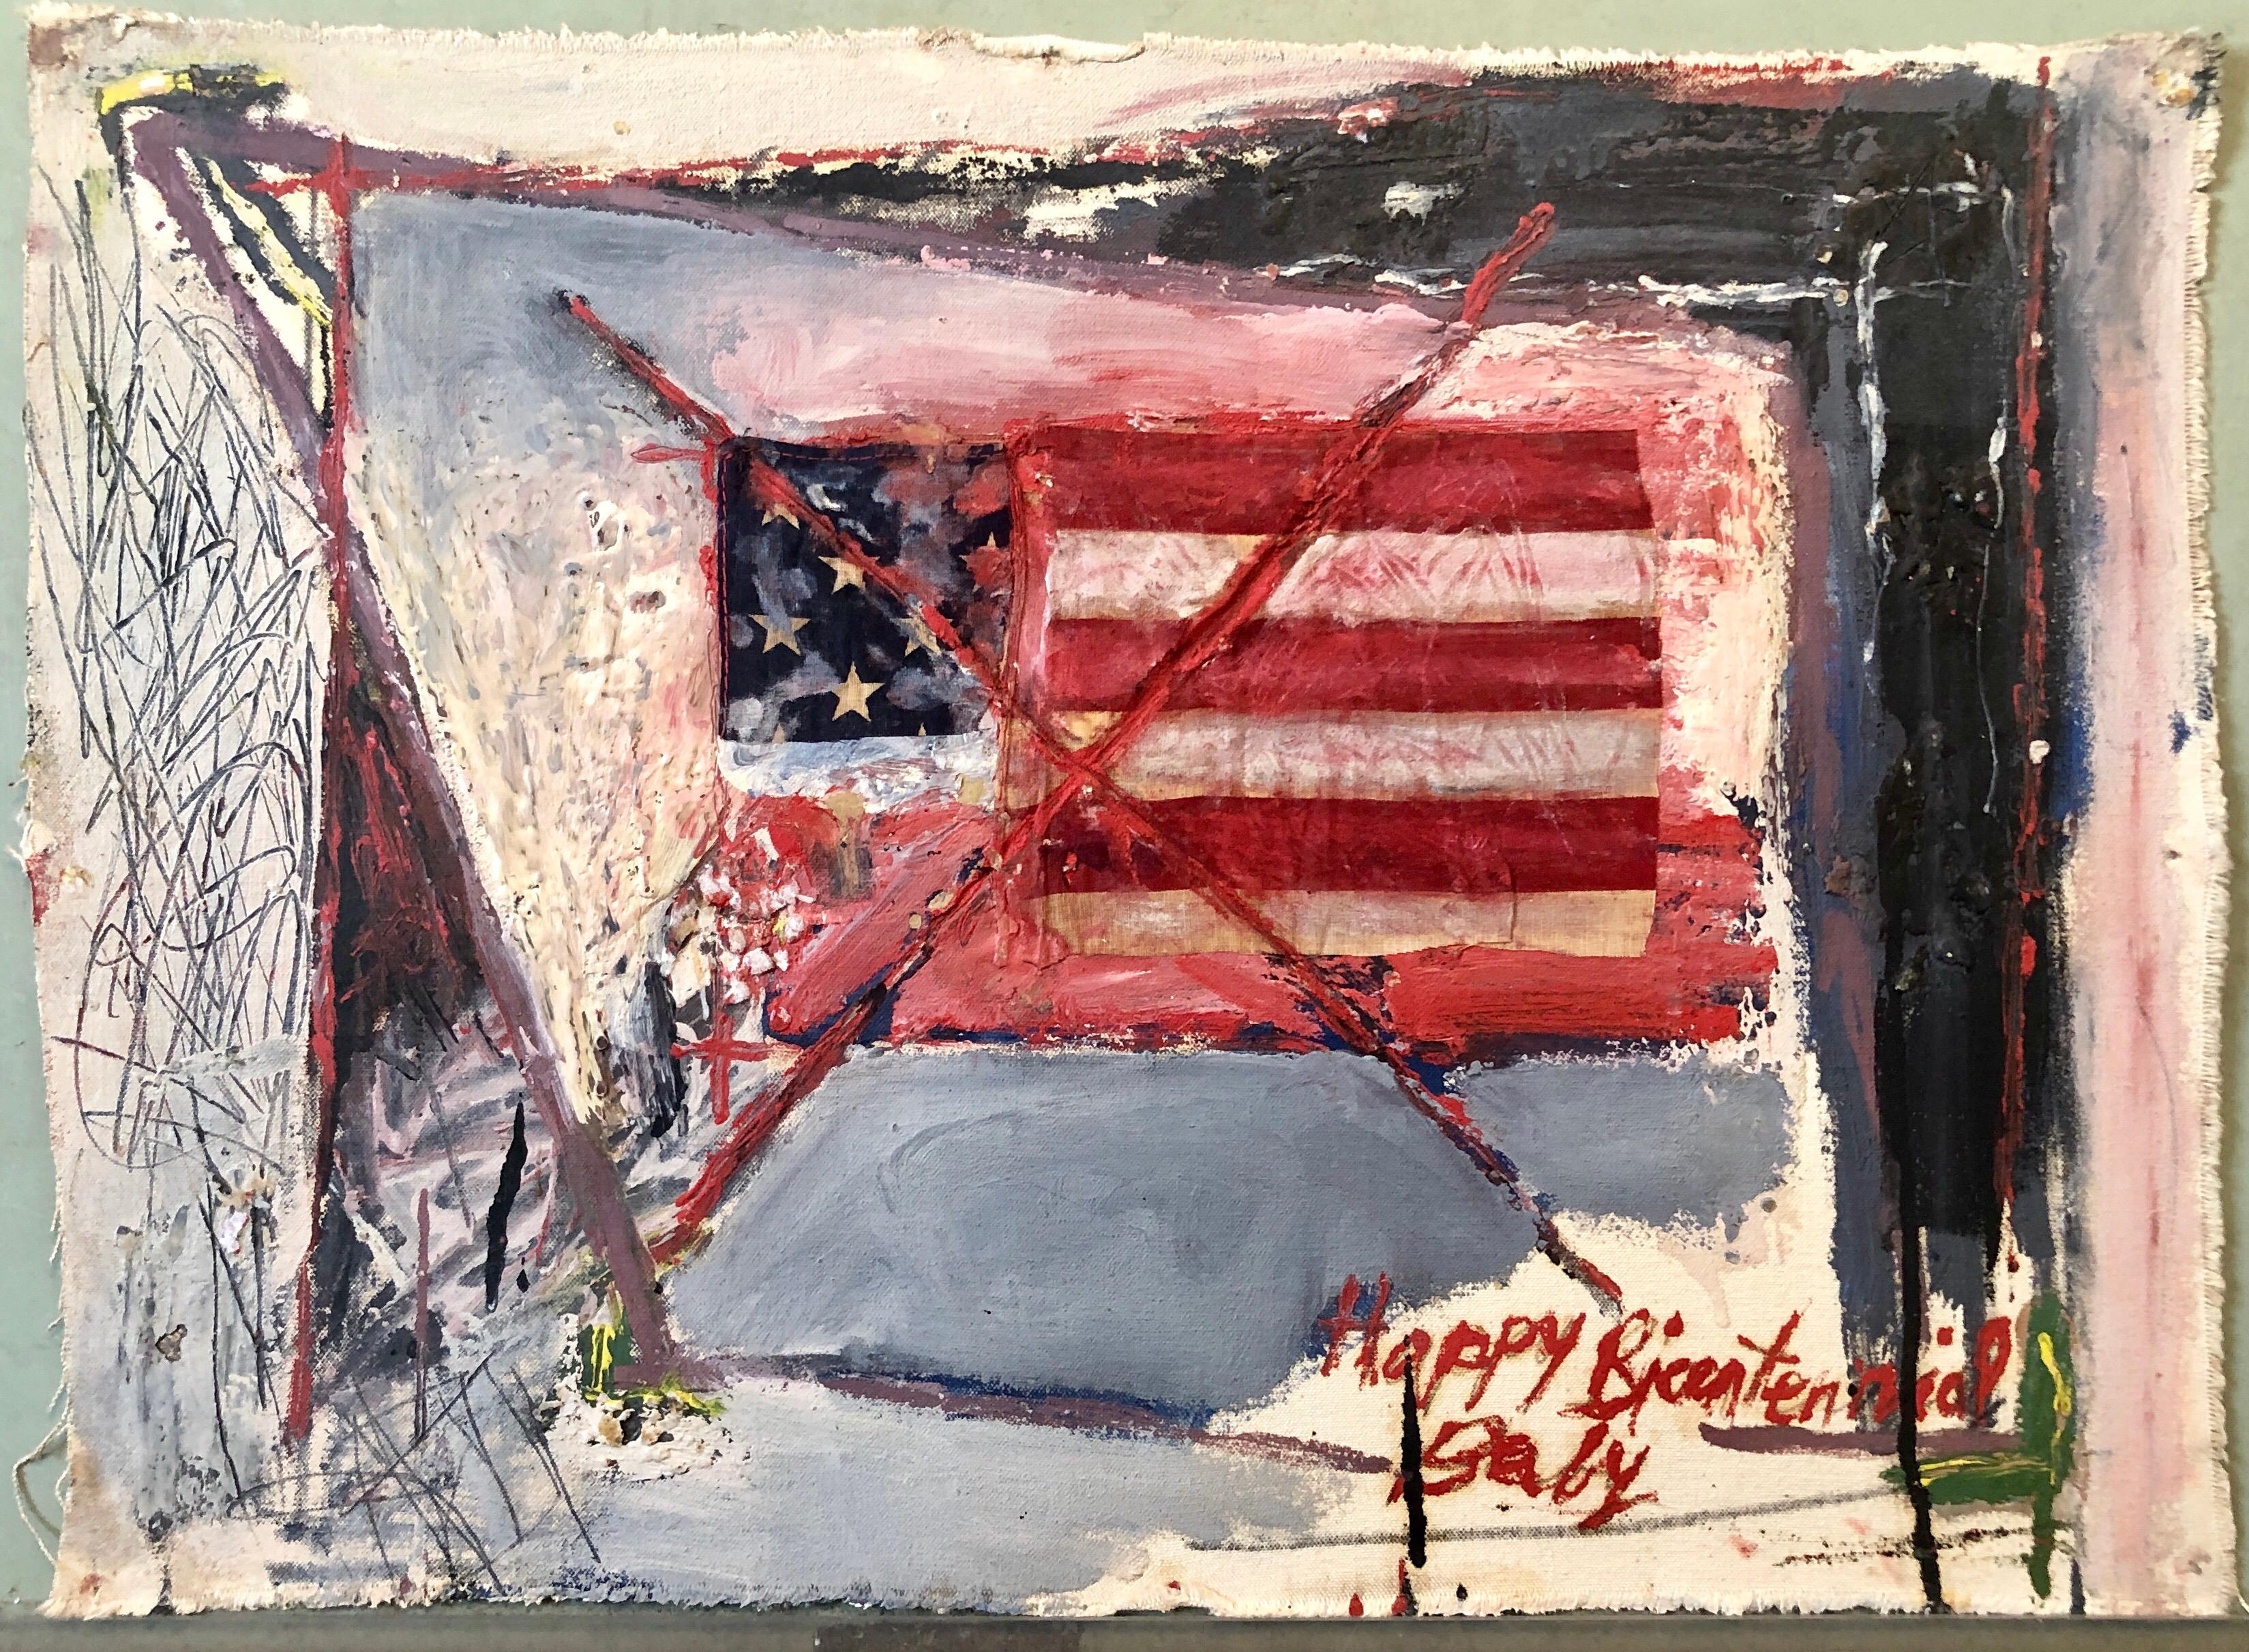 Katherine Porter Abstract Painting – Abstract Expressionist Happy Bicentennial Baby, American Flag Collage Painting